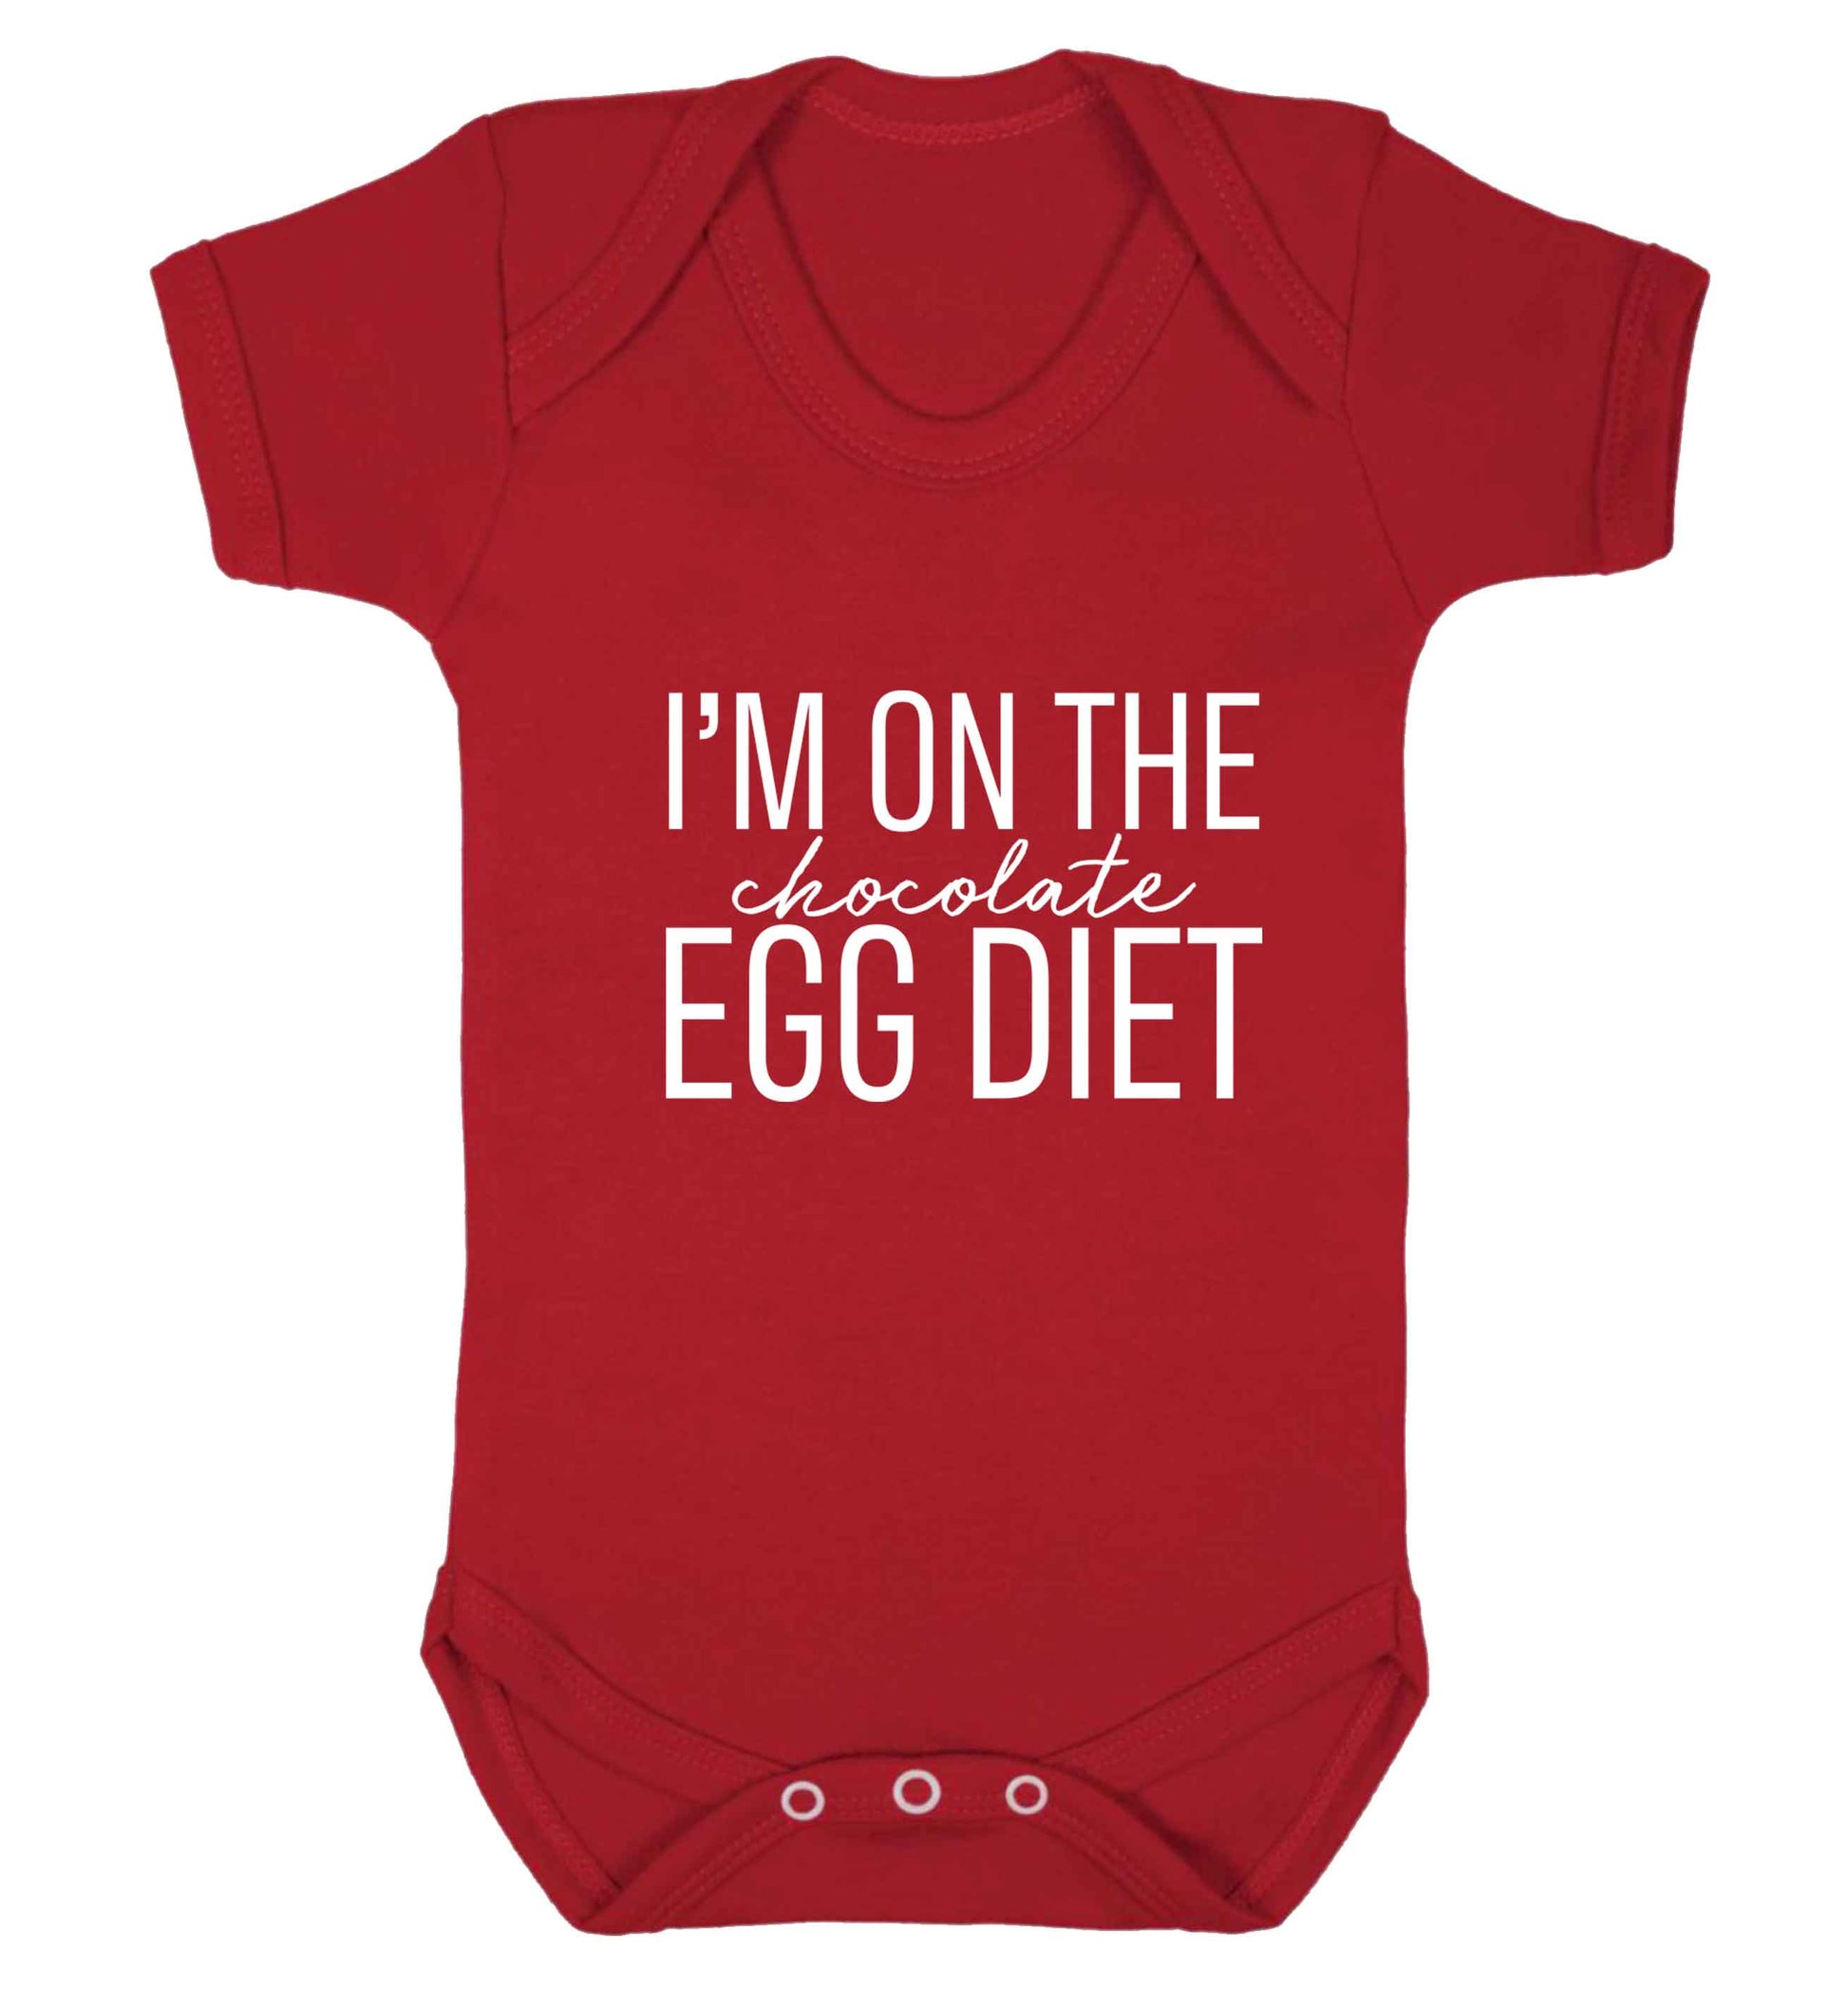 I'm on the chocolate egg diet baby vest red 18-24 months